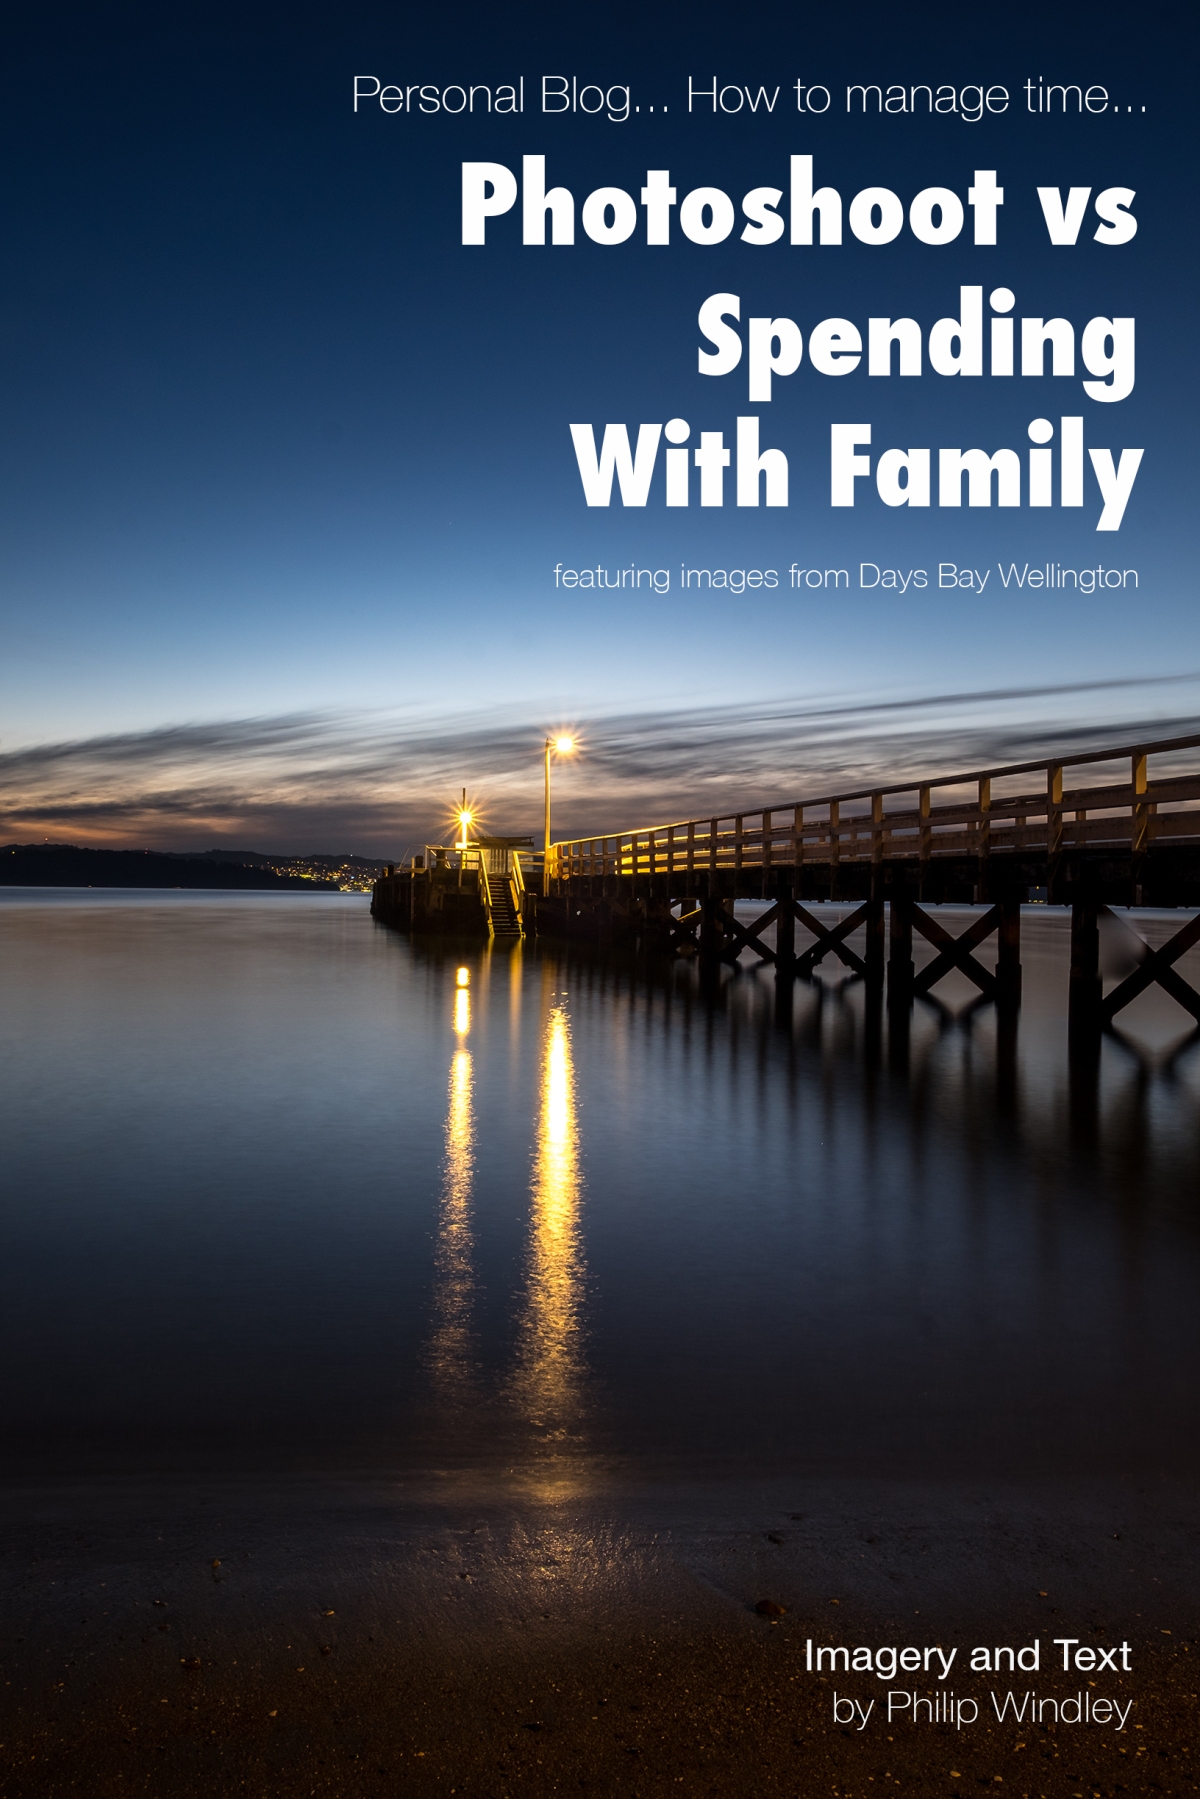 A Personal Blog: – How to manage time – Photoshoot vs Spending Time with Family featuring images from Days Bay Wellington